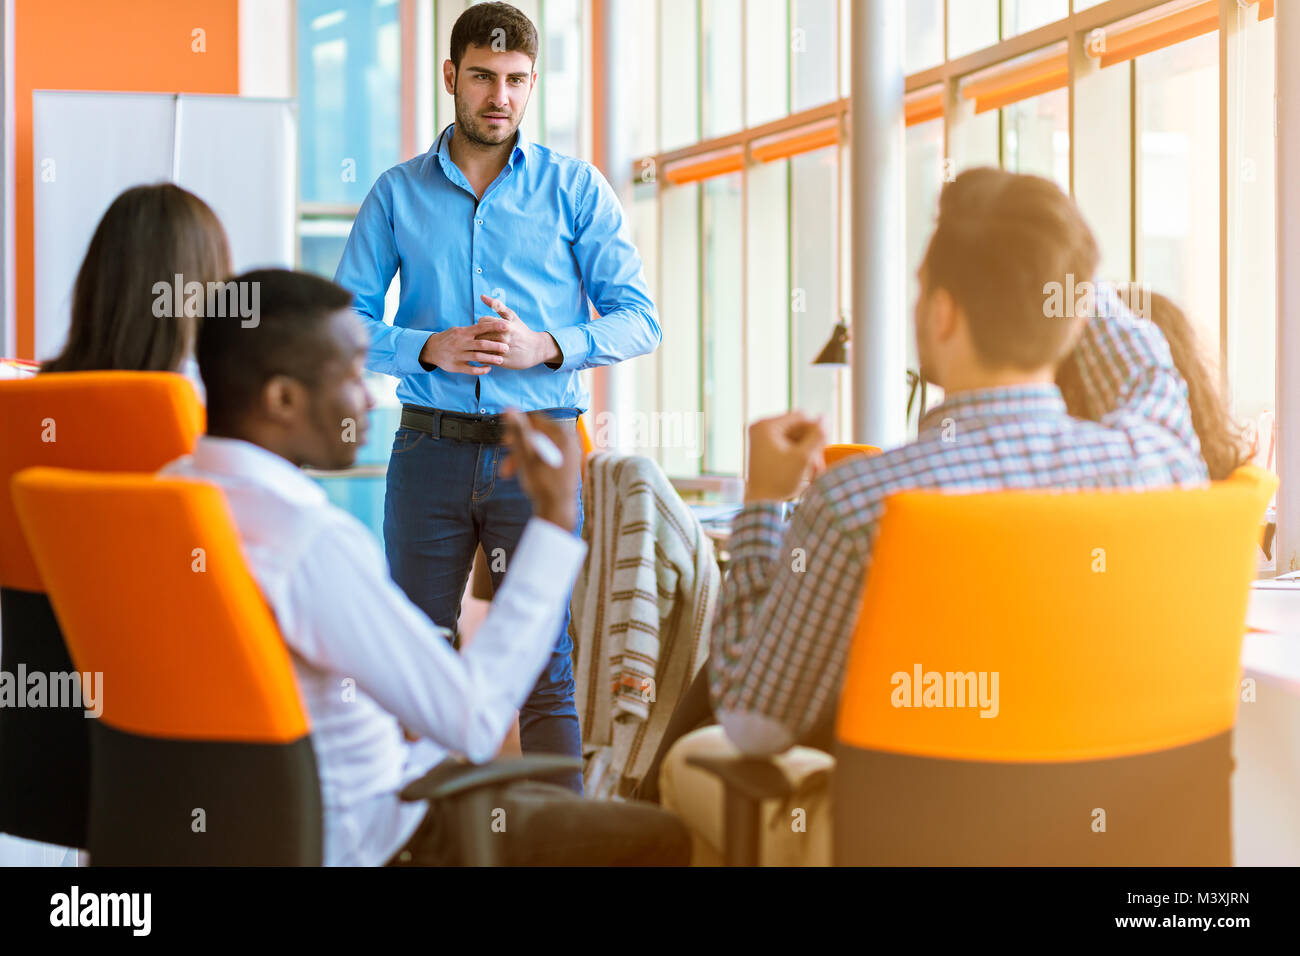 Group of casually dressed businesspeople discussing ideas in the office. Stock Photo